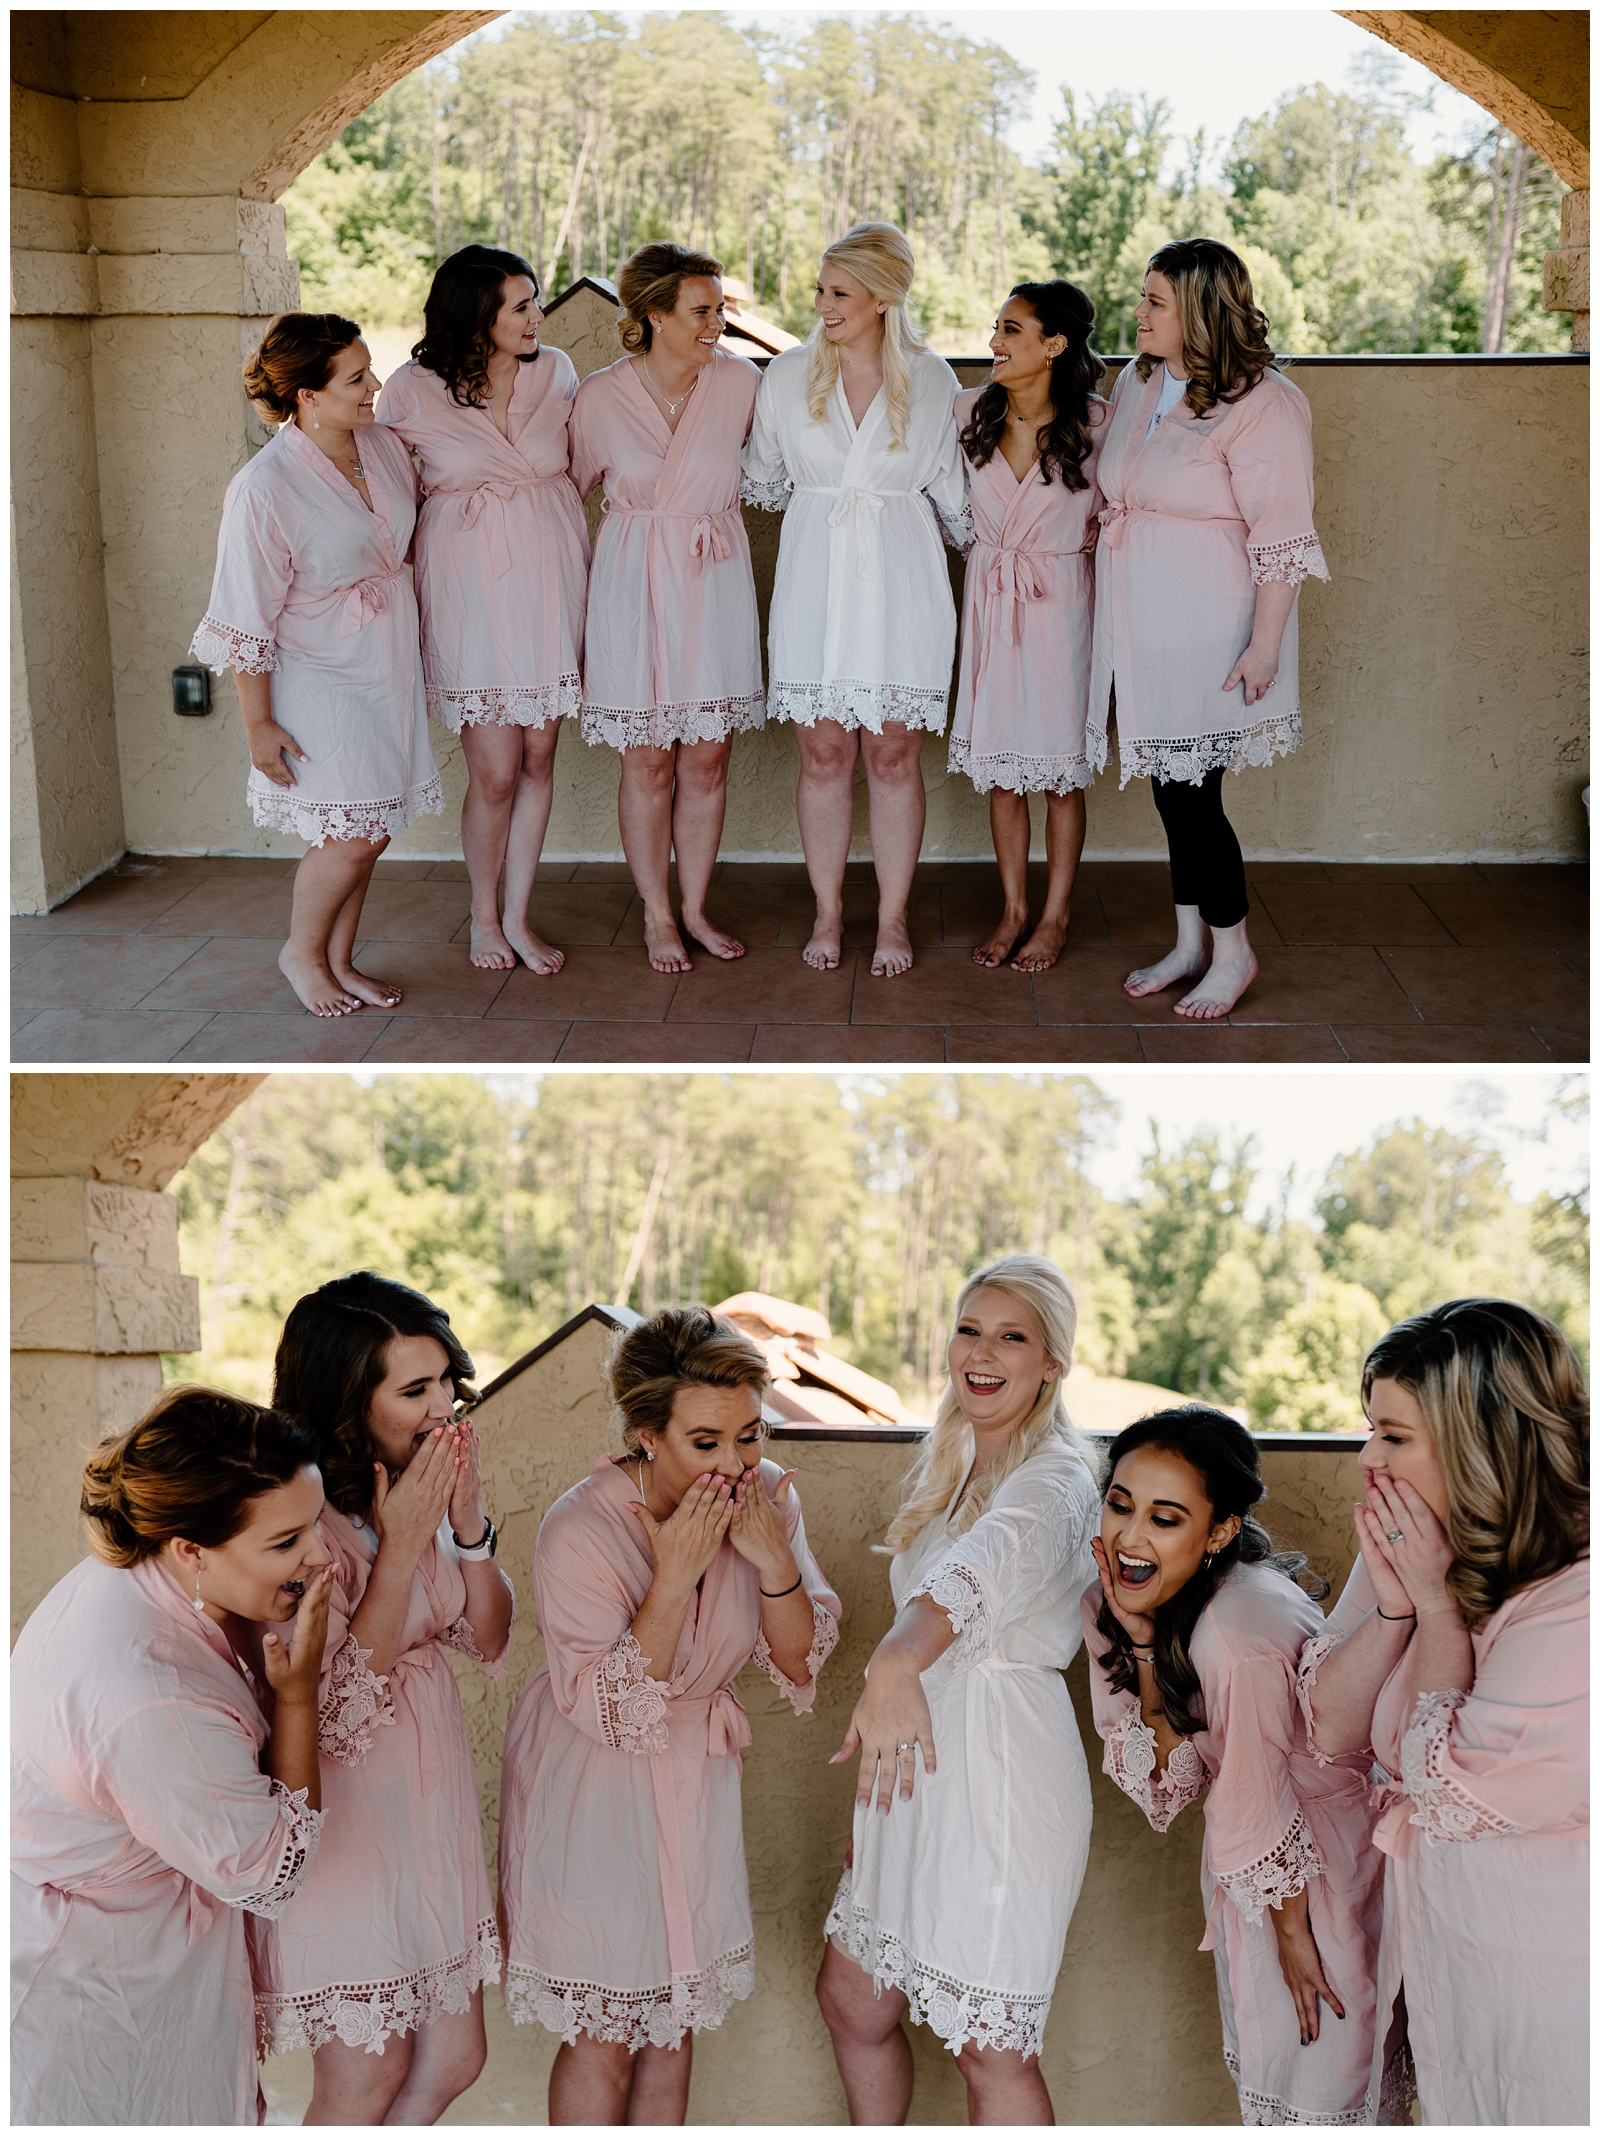 Southern bride with her bridesmaids at lakeside wedding in Stokesdale, NC by North Carolina photographer